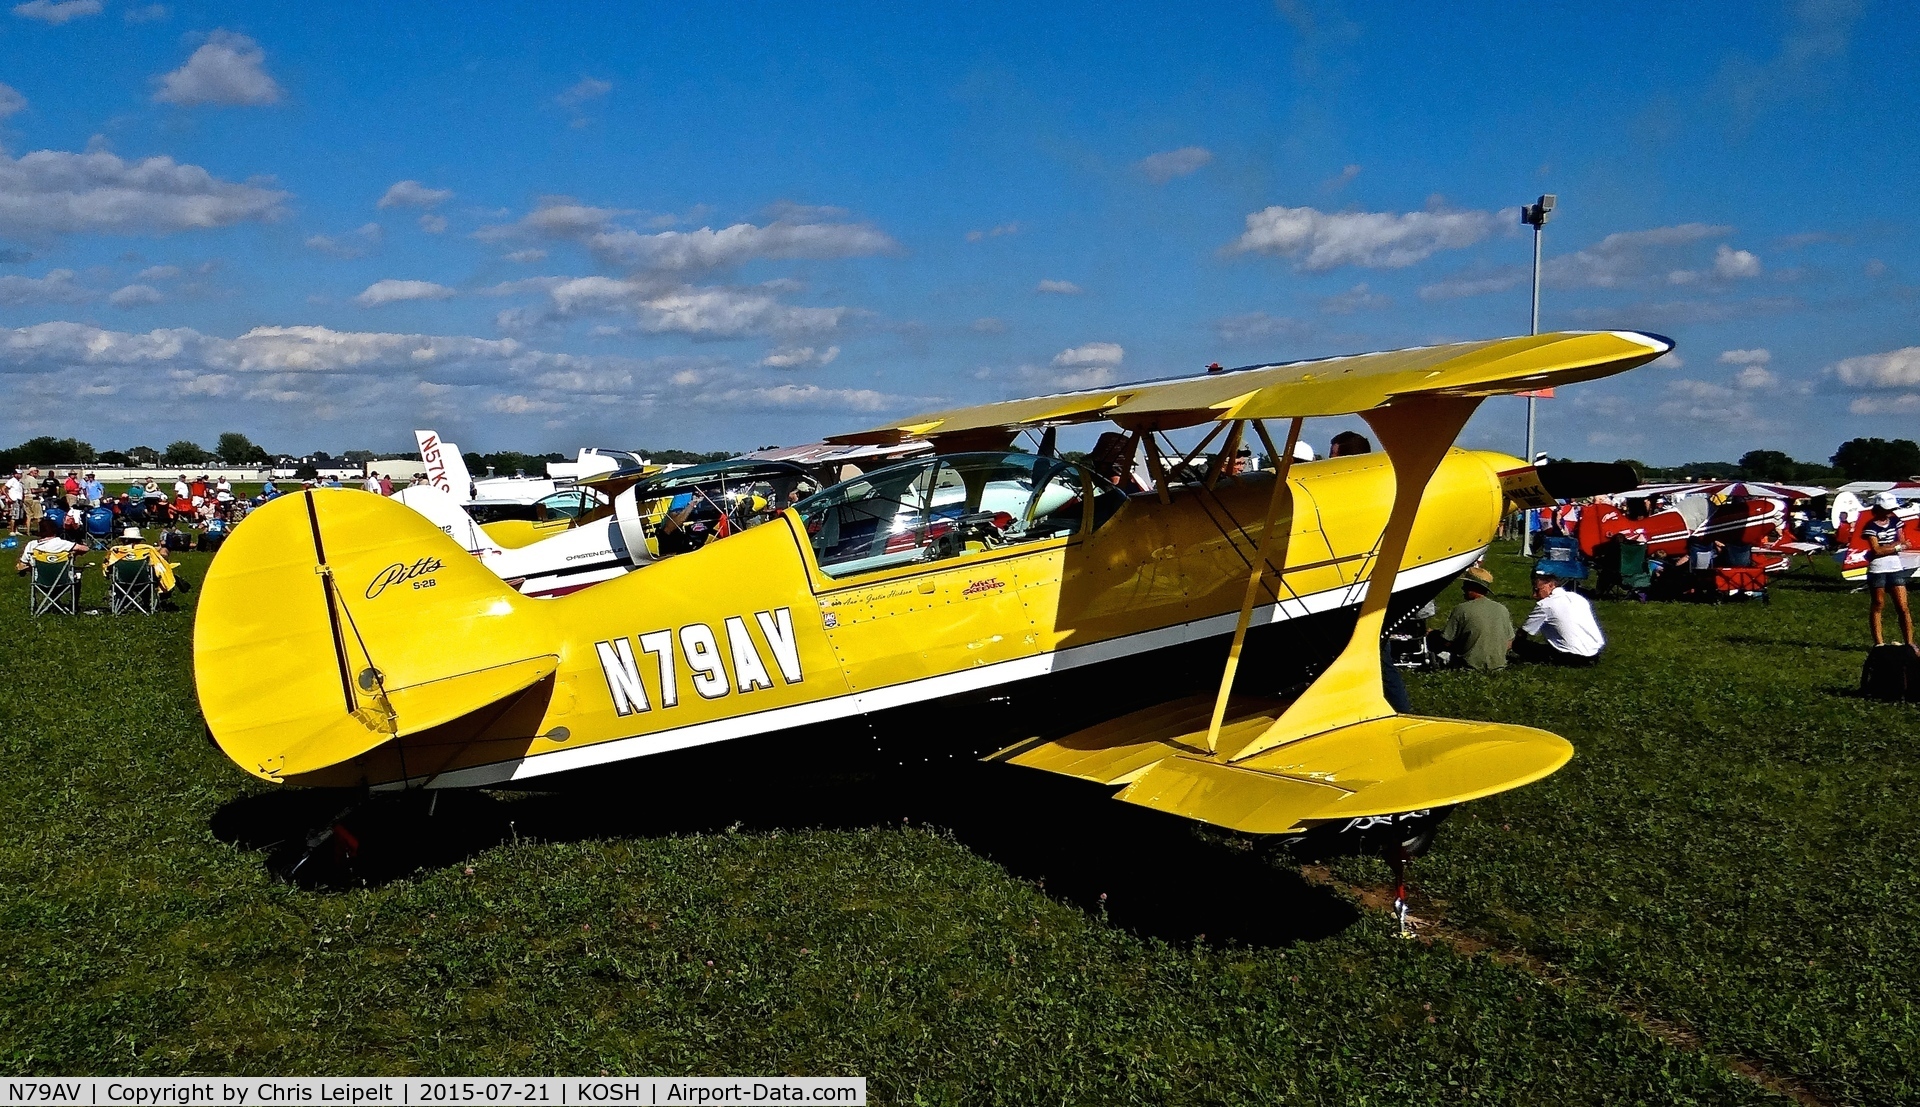 N79AV, 1986 Pitts S-2B Special C/N 5114, Minnesota-based 1986 Pitts S-2B on display at EAA AirVenture 2015.